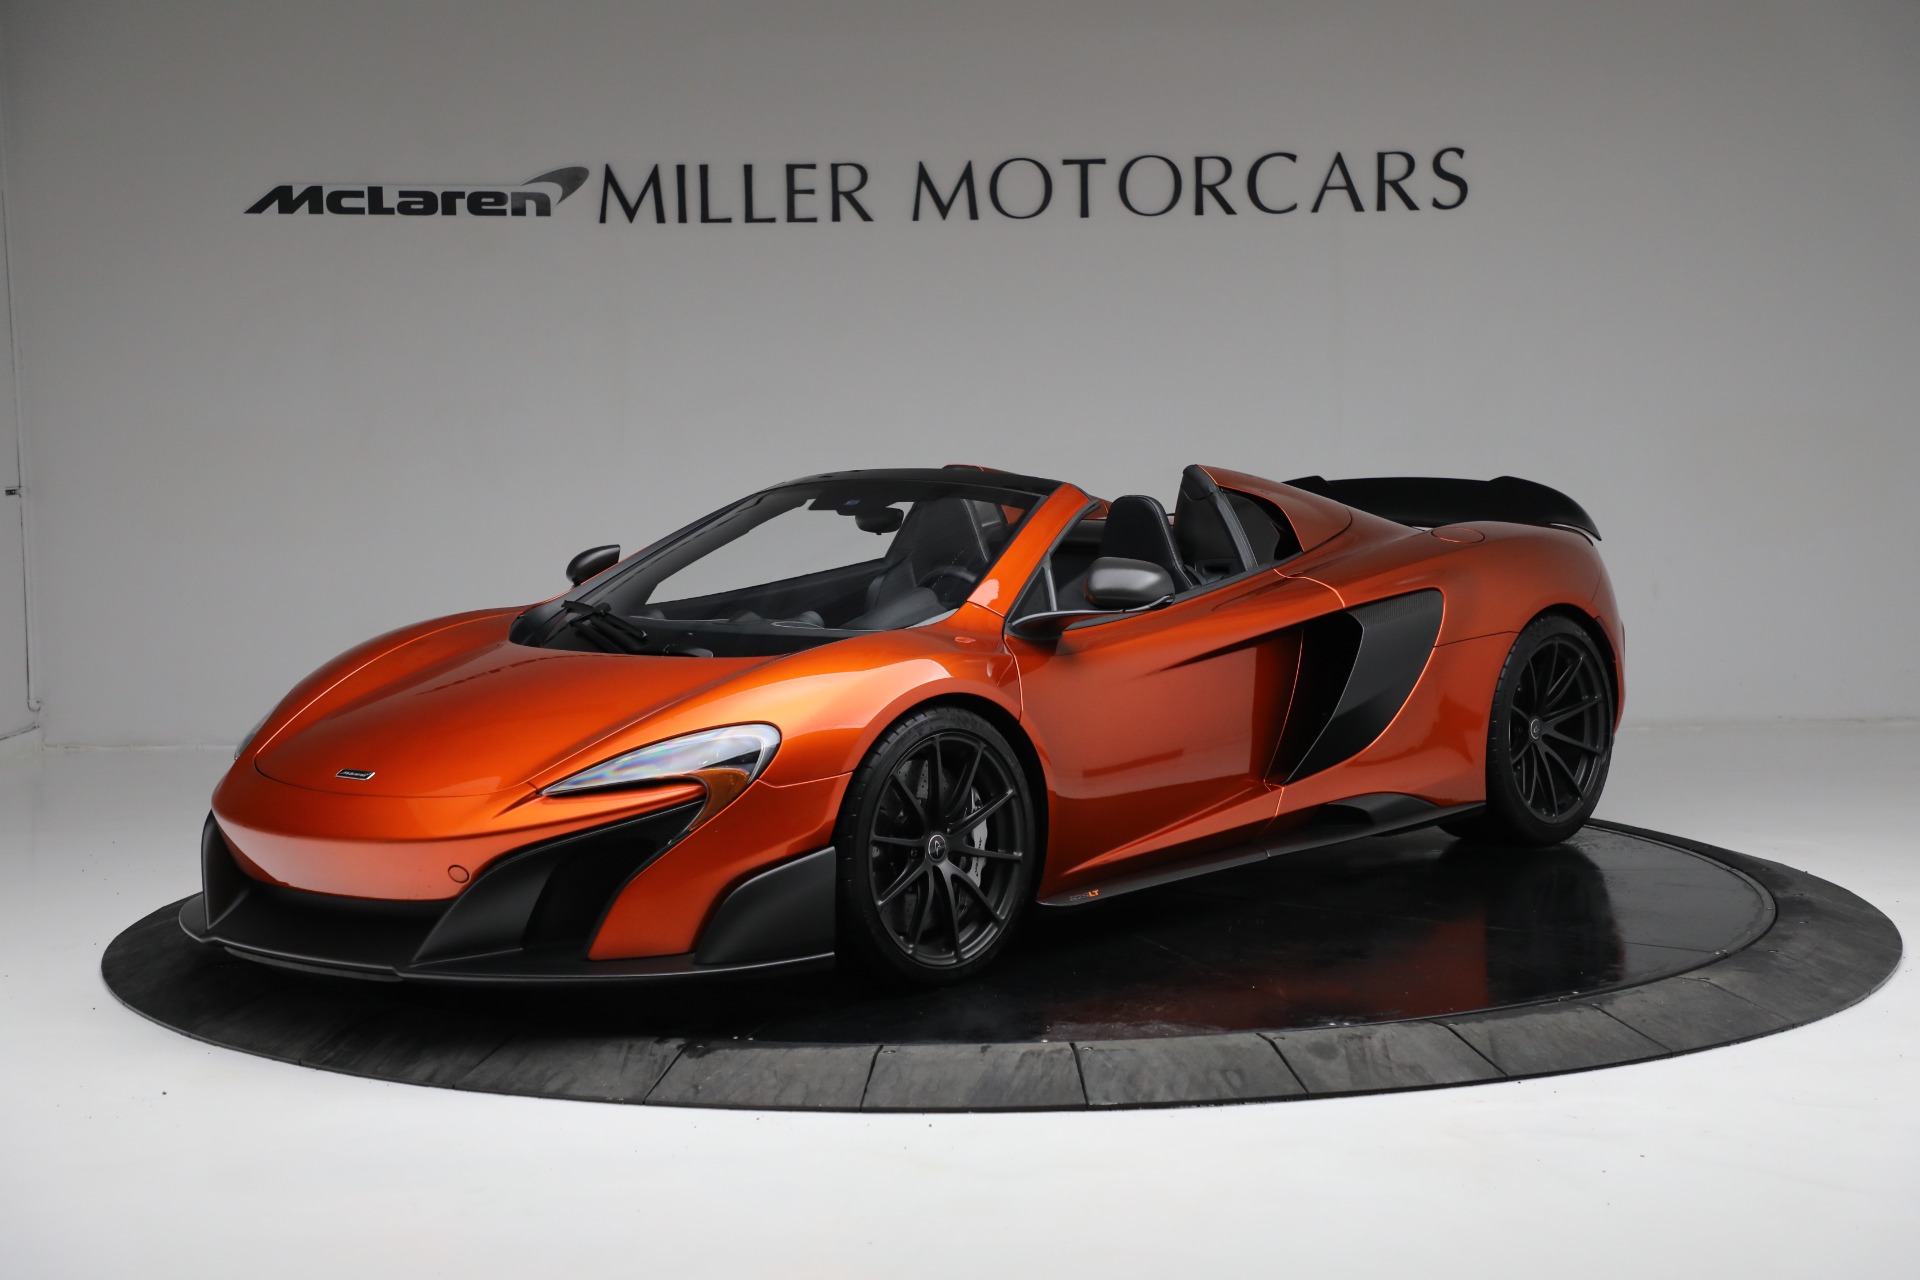 Used 2016 McLaren 675LT Spider for sale $275,900 at Bentley Greenwich in Greenwich CT 06830 1